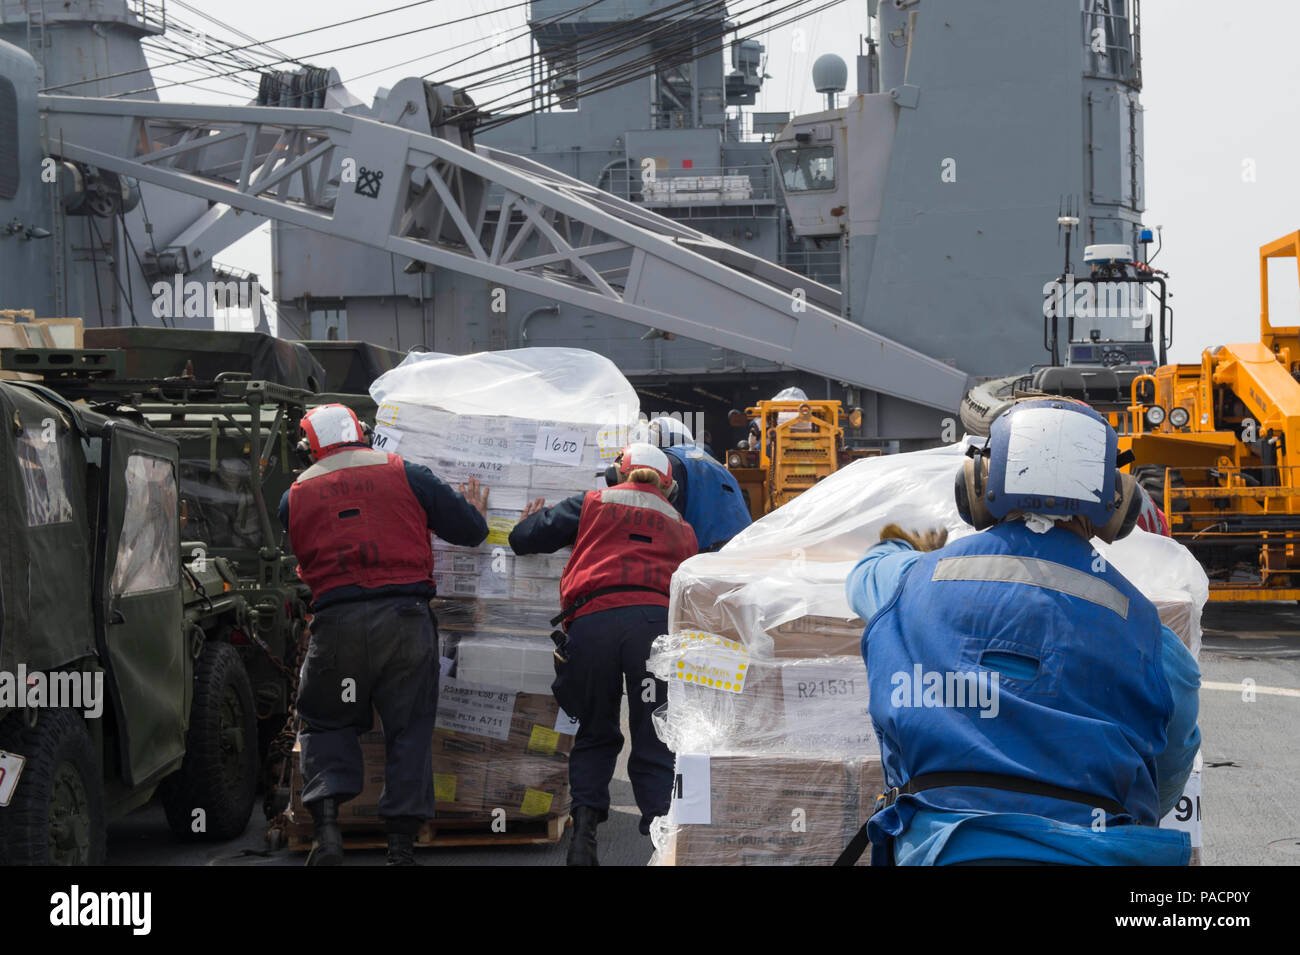 160316-N-RM689-124 EAST SEA (March 16, 2016) - Sailors assigned to amphibious dock landing ship USS Ashland (LSD 48) push pallets towards the boat deck where the working party waits to unload them during a vertical replenishment (VERTREP) at sea. Ashland is assigned to the Bonhomme Richard Expeditionary Strike Group and is participating in Ssang Yong 16, a biennial combined amphibious exercise conducted by forward-deployed U.S. forces with the Republic of Korea navy and Marine Corps, Australian army and Royal New Zealand army forces in order to strengthen our interoperability and working relat Stock Photo